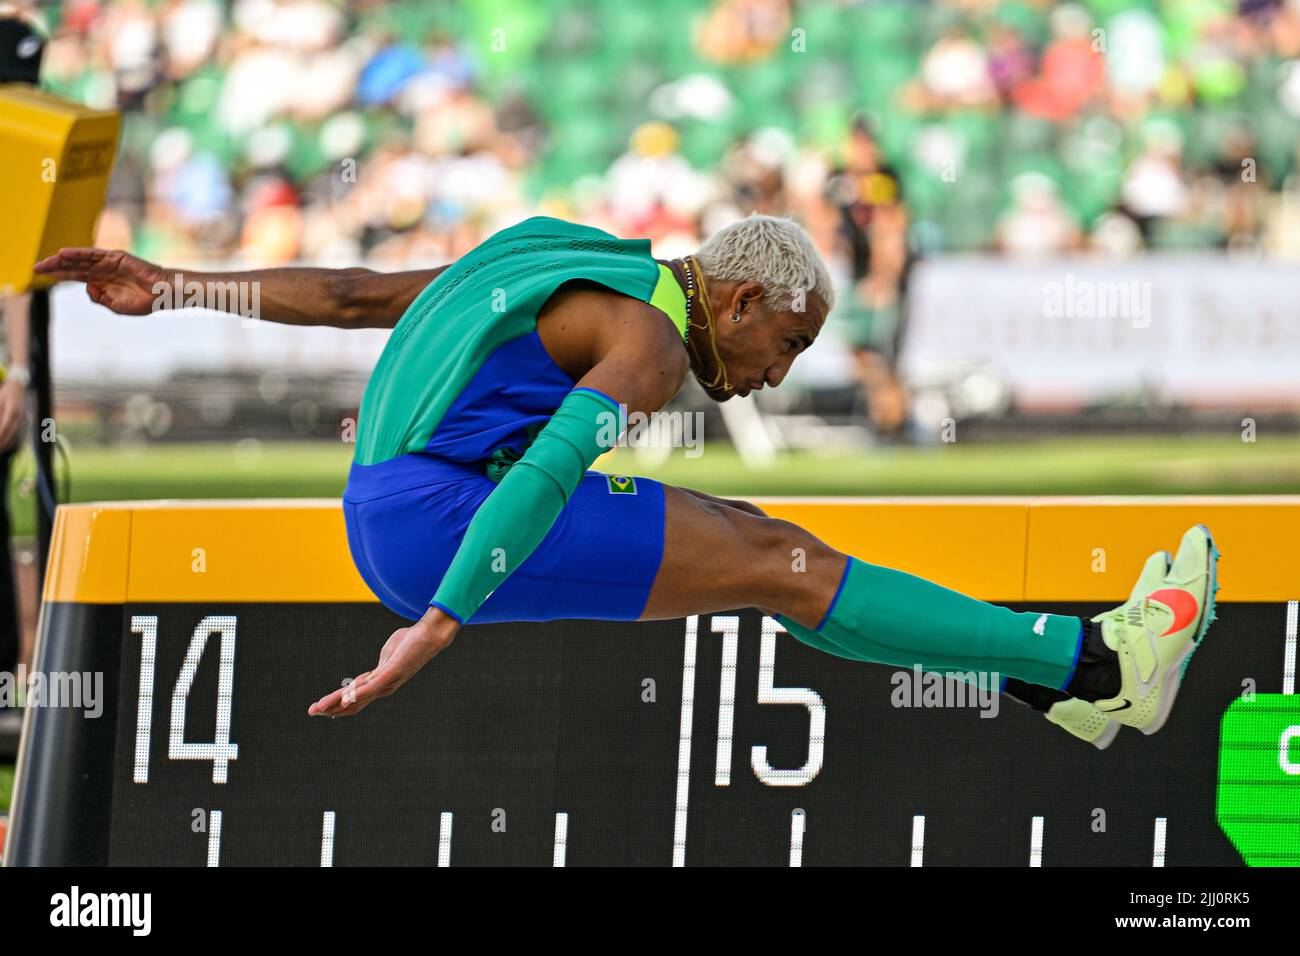 EUGENE, UNITED STATES - JULY 21: Almir Dos Santos of Brazil competing on Men's triple jump during the World Athletics Championships on July 21, 2022 in Eugene, United States (Photo by Andy Astfalck/BSR Agency) Atletiekunie Stock Photo